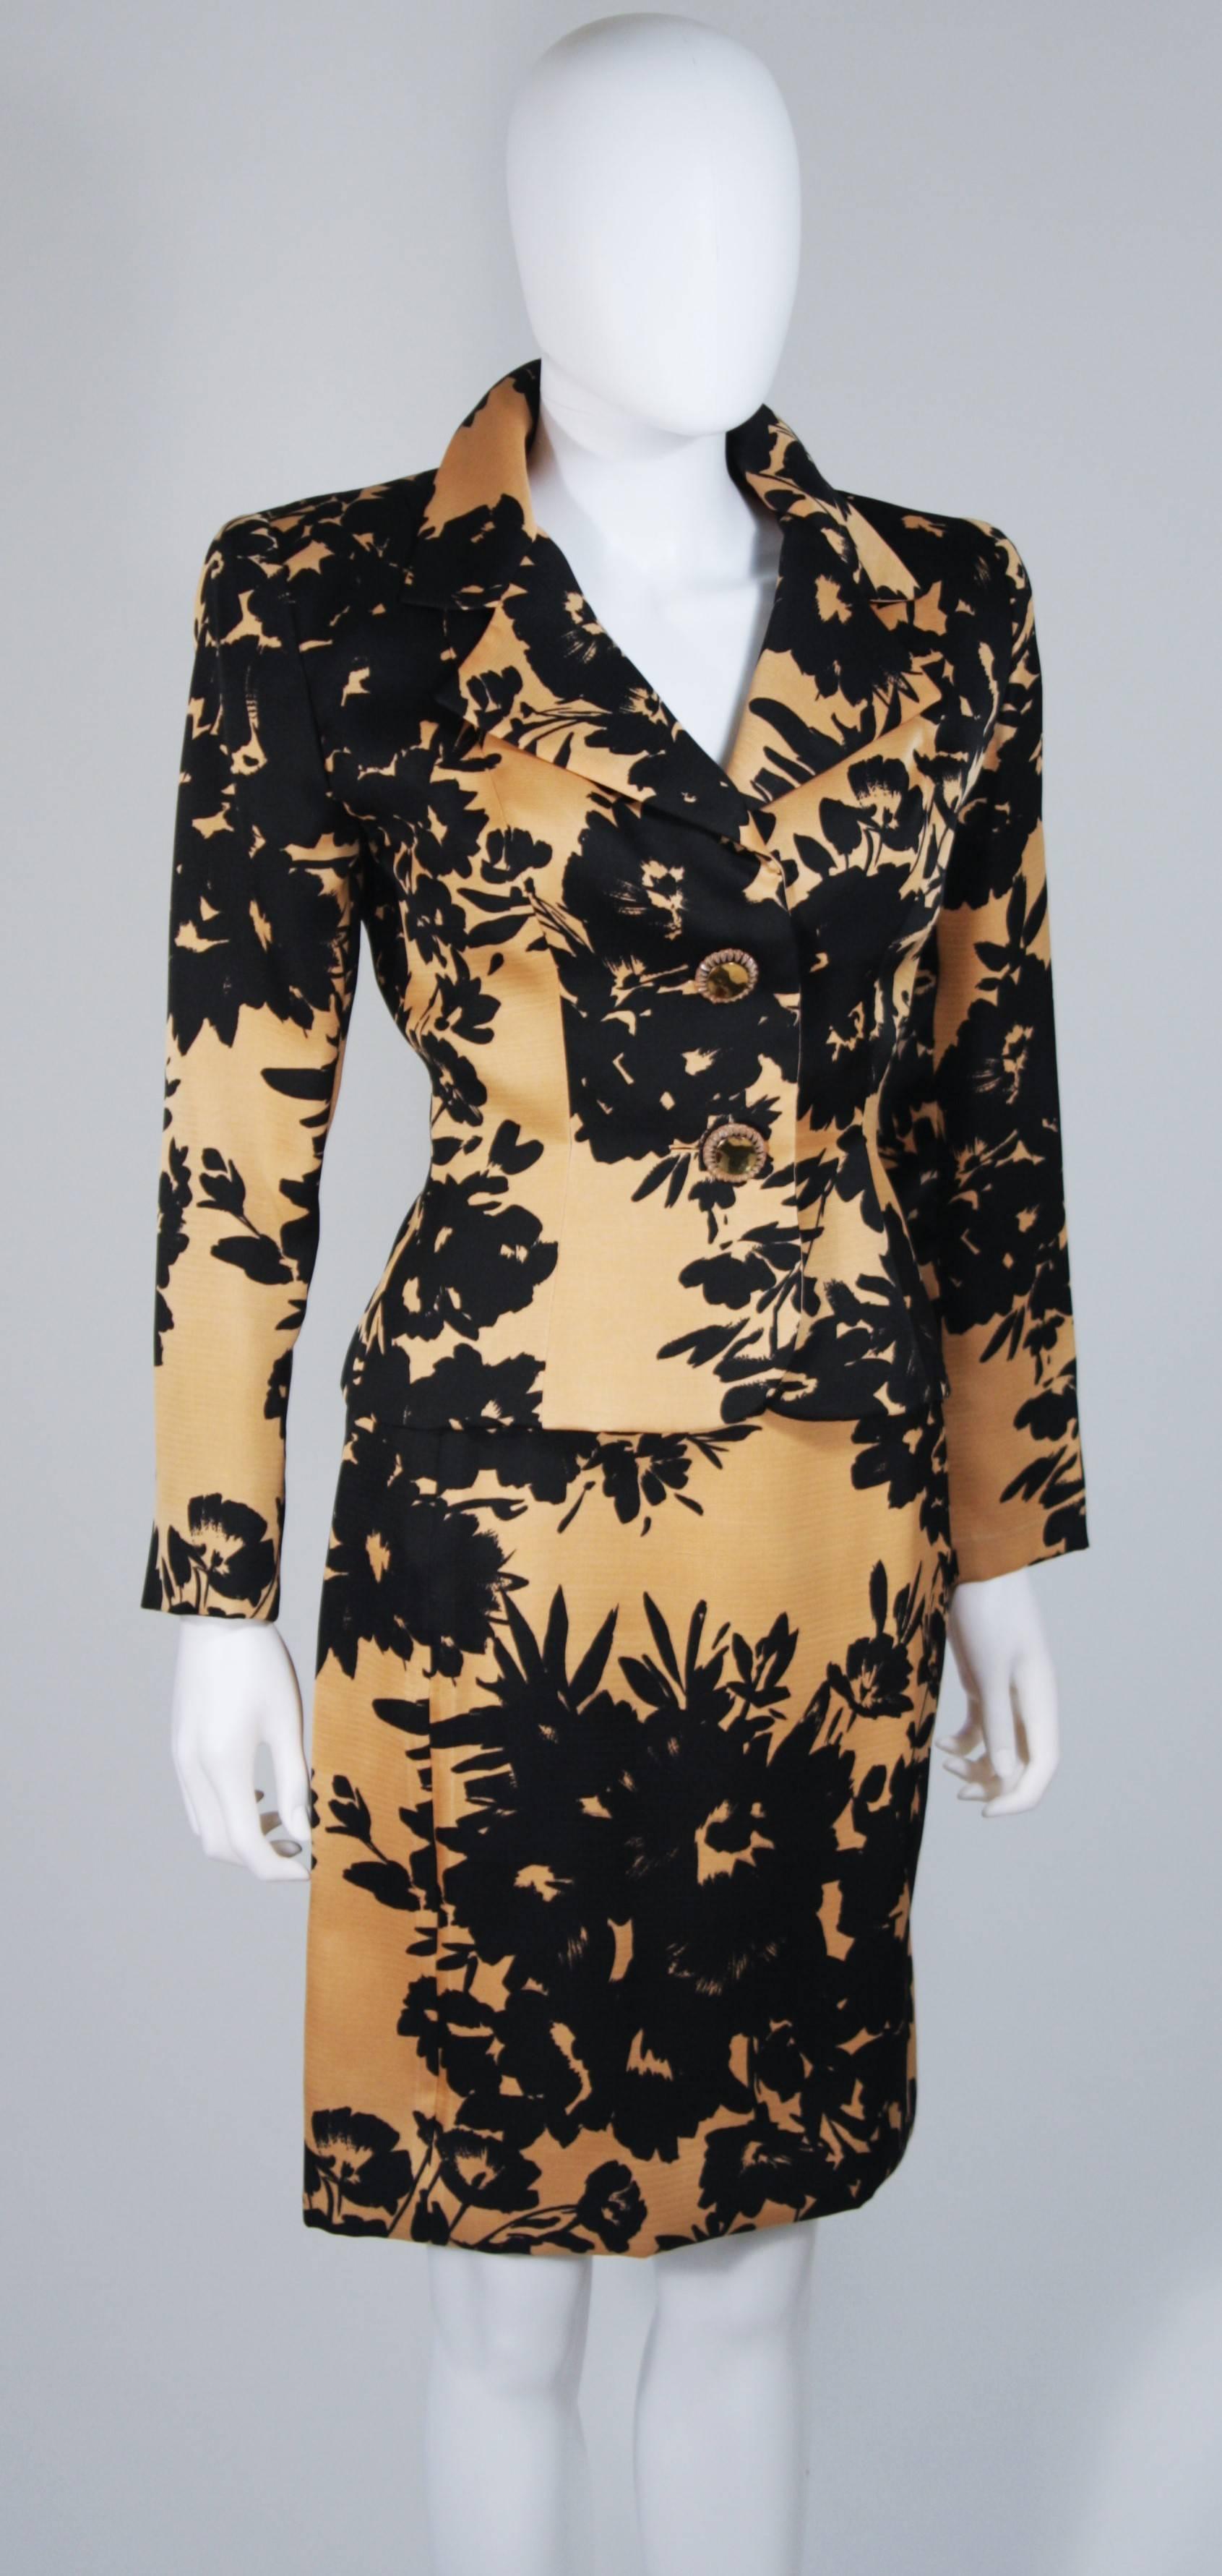 Women's GIVENCHY Circa 1980s Apricot Brown and Black Floral Print Suit Size 6-8